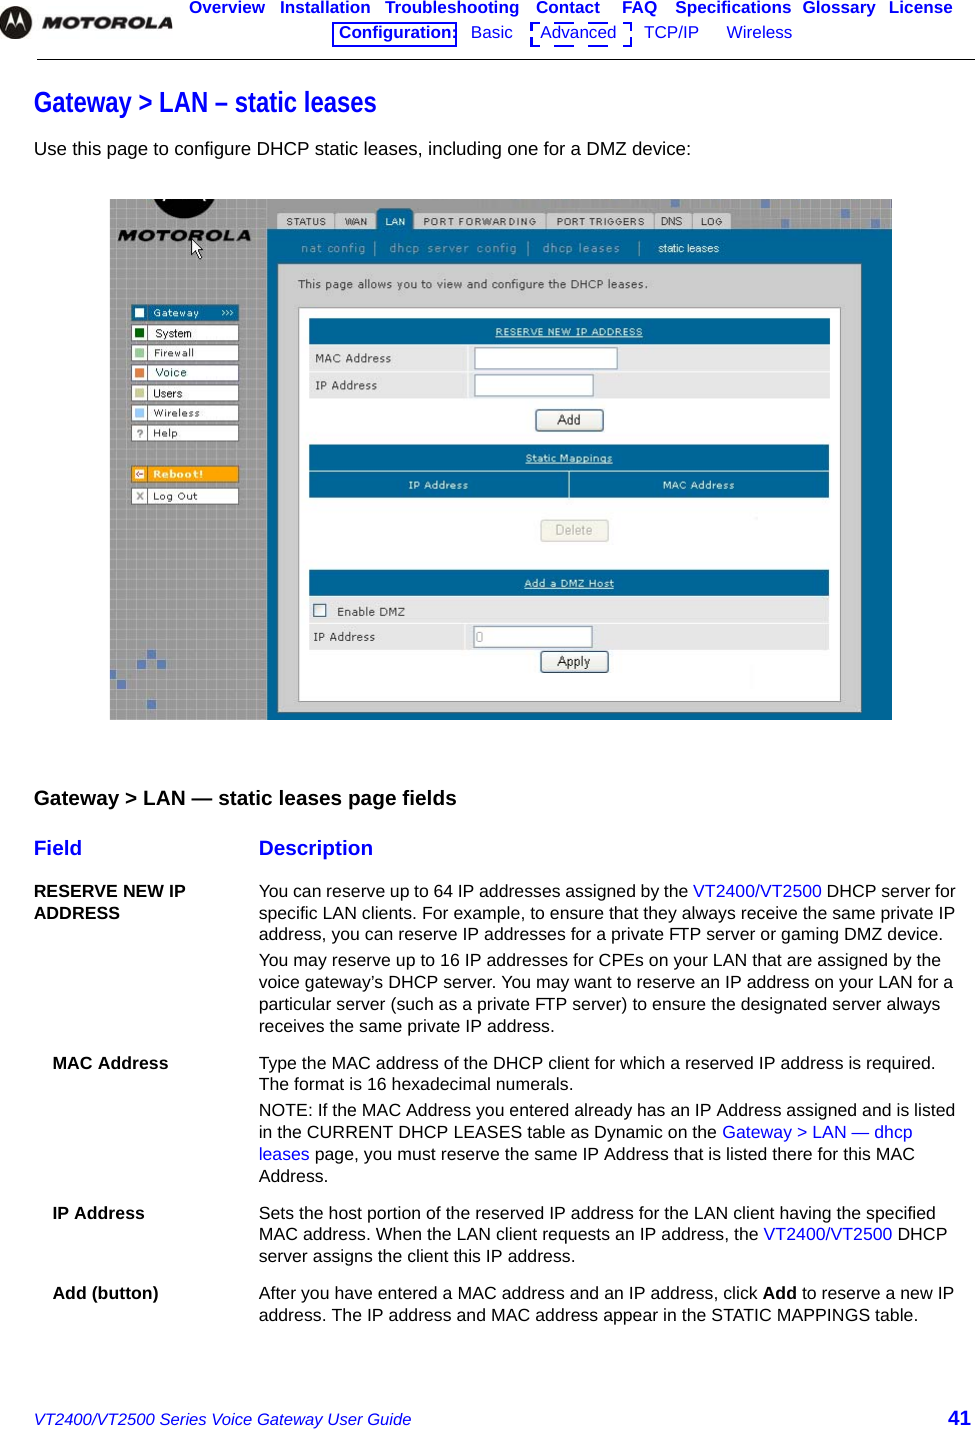 VT2400/VT2500 Series Voice Gateway User Guide 41Overview Installation Troubleshooting Contact FAQ Specifications Glossary LicenseConfiguration:   Basic      Advanced      TCP/IP      Wireless    Gateway &gt; LAN – static leasesUse this page to configure DHCP static leases, including one for a DMZ device:Gateway &gt; LAN — static leases page fieldsField DescriptionRESERVE NEW IP ADDRESS You can reserve up to 64 IP addresses assigned by the VT2400/VT2500 DHCP server for specific LAN clients. For example, to ensure that they always receive the same private IP address, you can reserve IP addresses for a private FTP server or gaming DMZ device.You may reserve up to 16 IP addresses for CPEs on your LAN that are assigned by the voice gateway’s DHCP server. You may want to reserve an IP address on your LAN for a particular server (such as a private FTP server) to ensure the designated server always receives the same private IP address.MAC Address Type the MAC address of the DHCP client for which a reserved IP address is required. The format is 16 hexadecimal numerals. NOTE: If the MAC Address you entered already has an IP Address assigned and is listed in the CURRENT DHCP LEASES table as Dynamic on the Gateway &gt; LAN — dhcp leases page, you must reserve the same IP Address that is listed there for this MAC Address. IP Address Sets the host portion of the reserved IP address for the LAN client having the specified MAC address. When the LAN client requests an IP address, the VT2400/VT2500 DHCP server assigns the client this IP address.Add (button) After you have entered a MAC address and an IP address, click Add to reserve a new IP address. The IP address and MAC address appear in the STATIC MAPPINGS table.